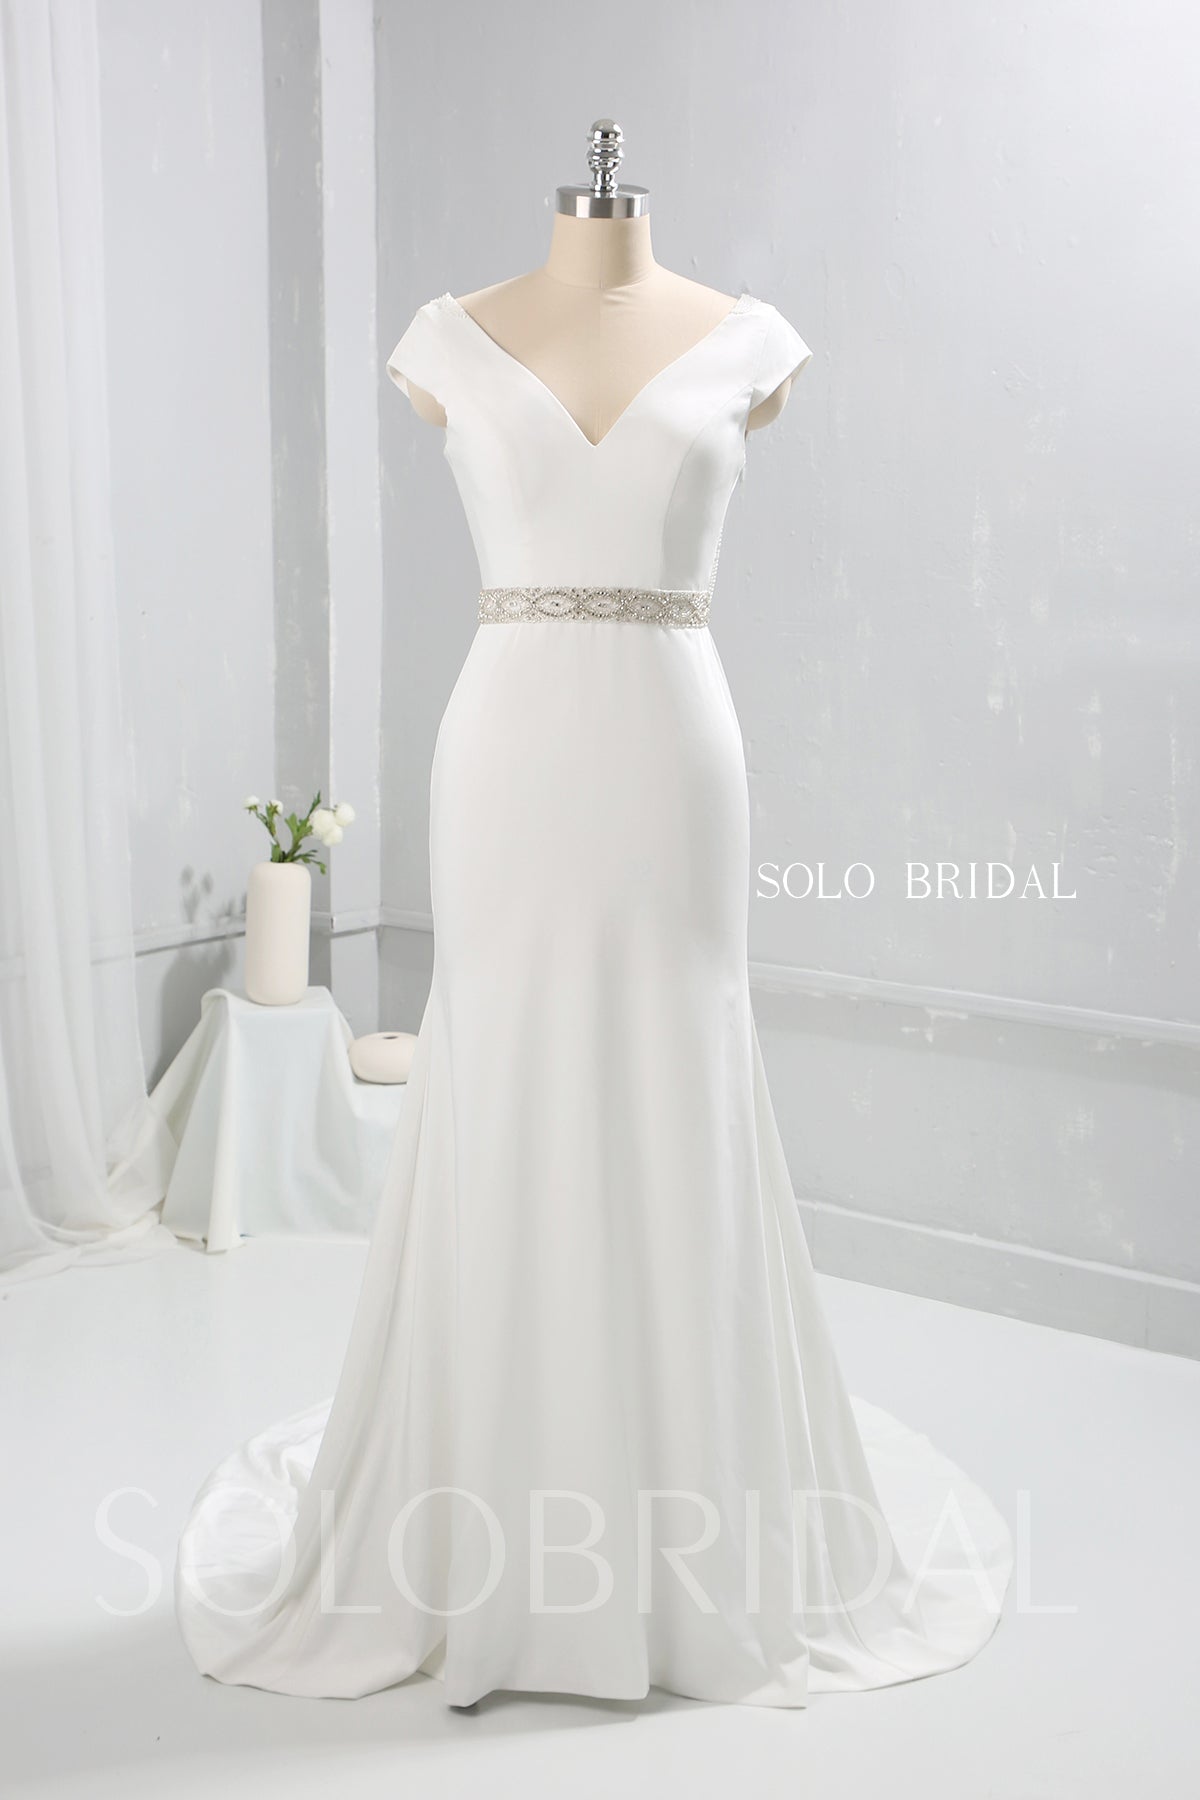 Ivory Crepe Wedding Dress with Beaded Belt and Pearl Draped Back